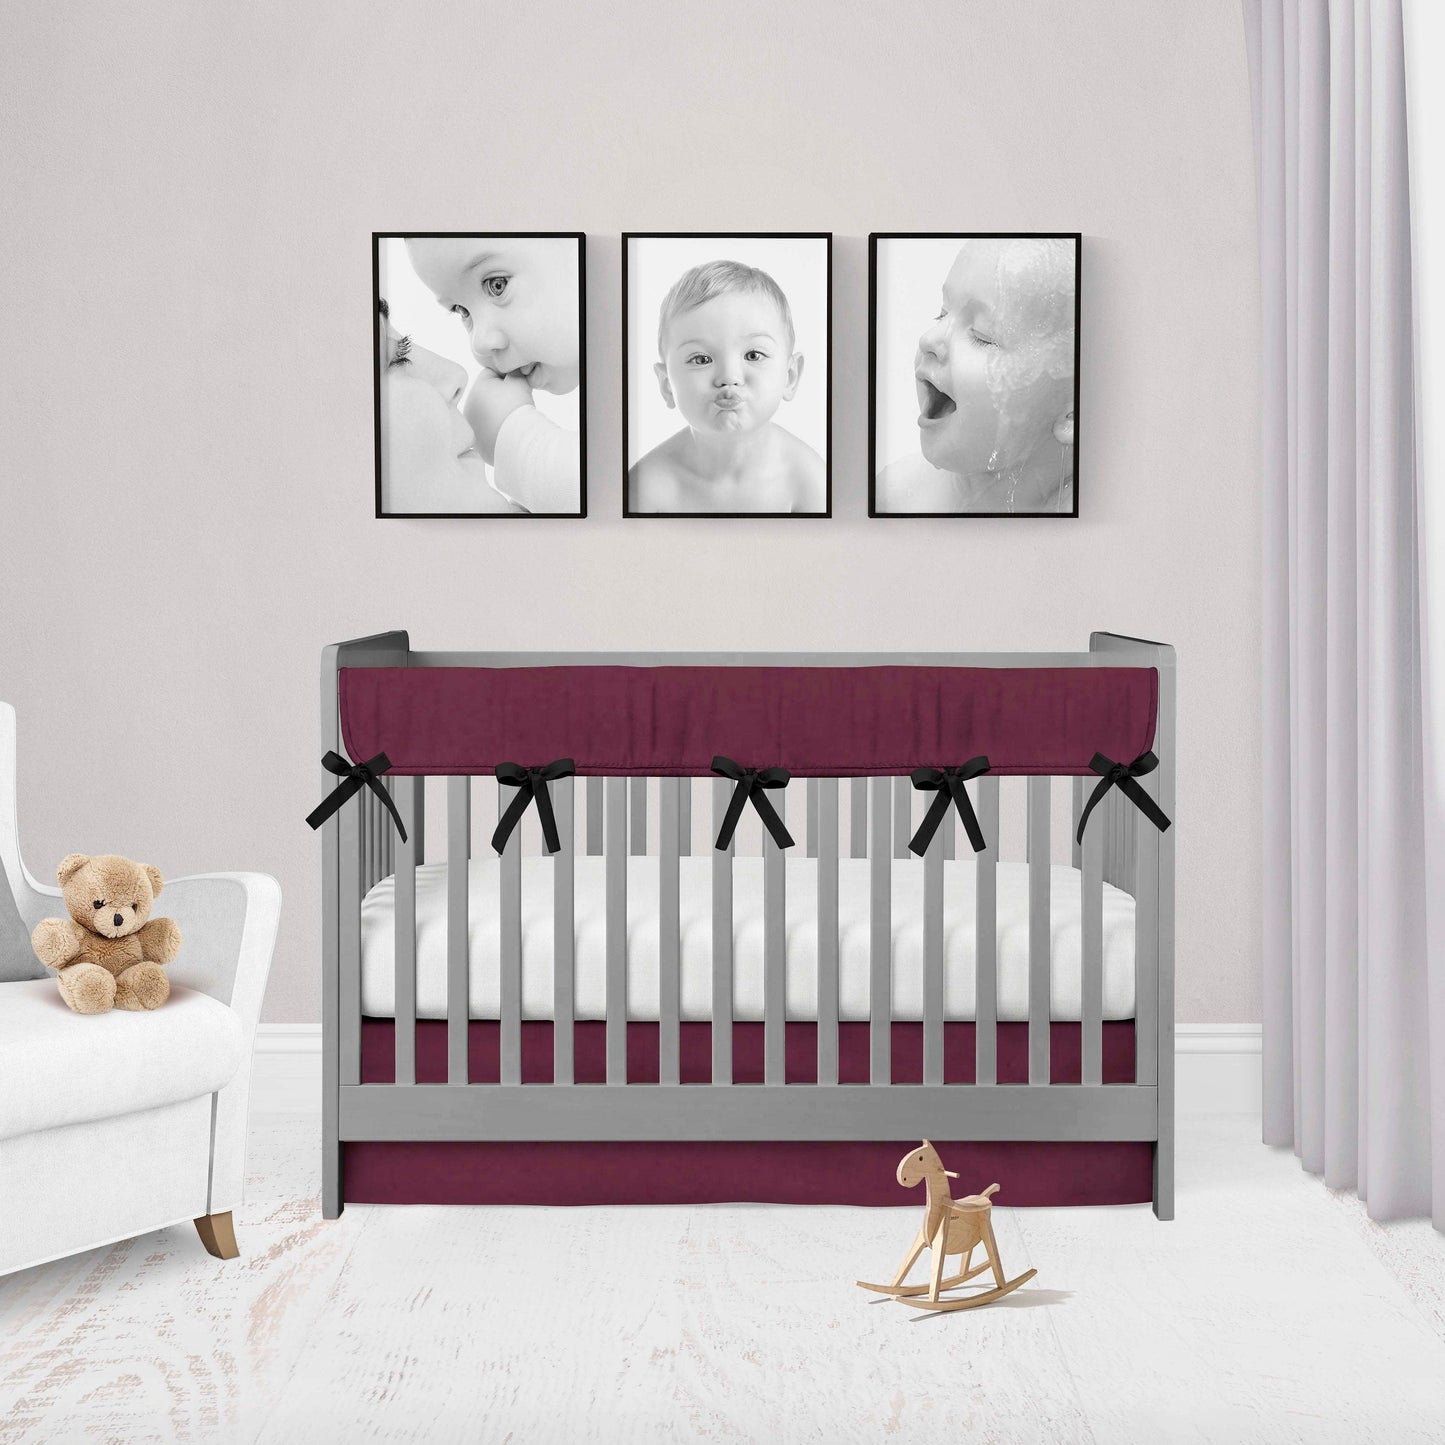 maroon rail cover with black ties & maroon crib skirt shown in the flat option